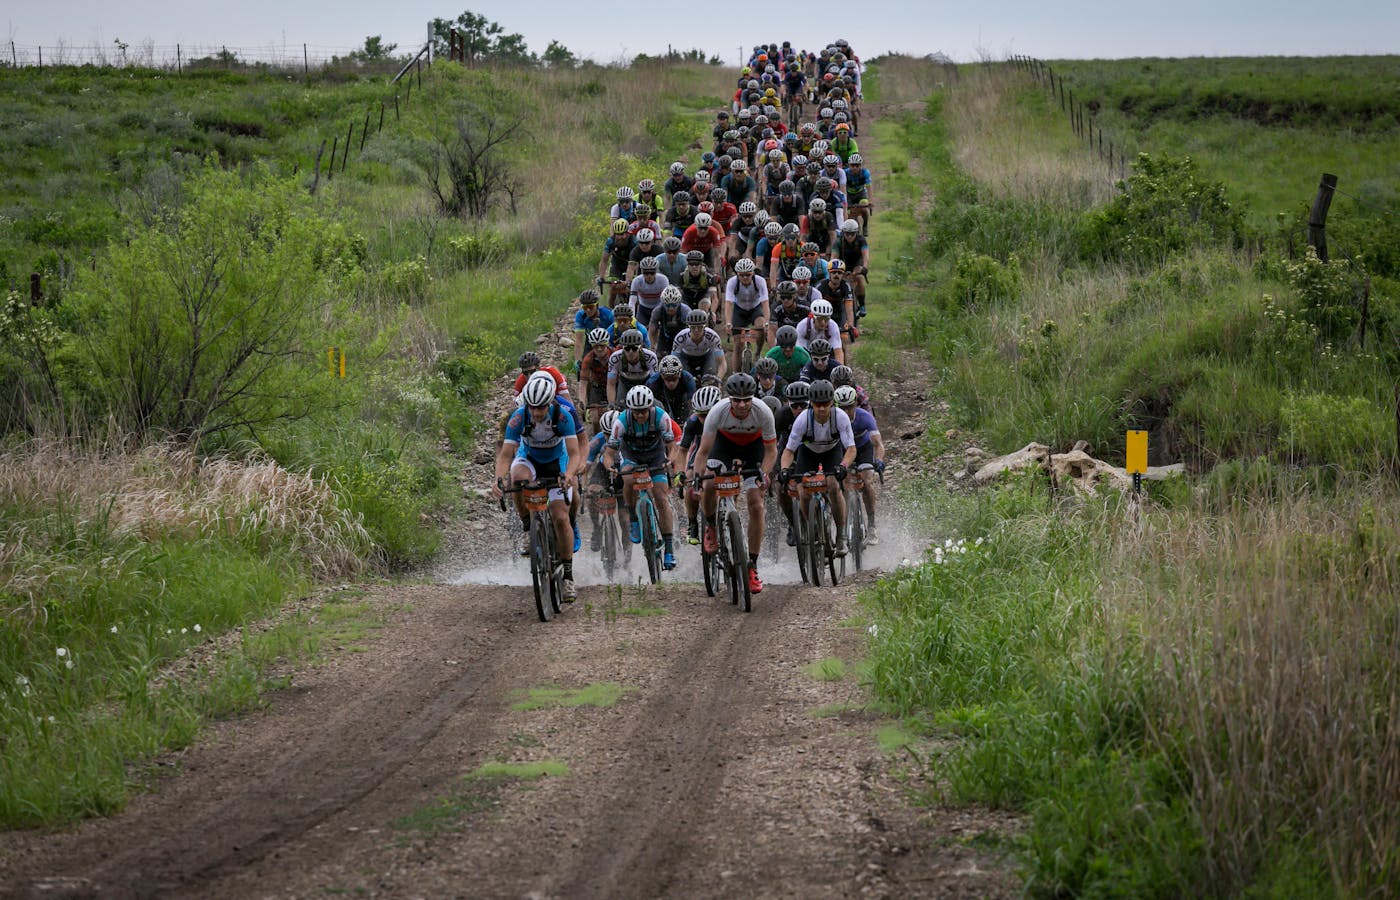 The peloton at Unbound. PHOTO: Life Time